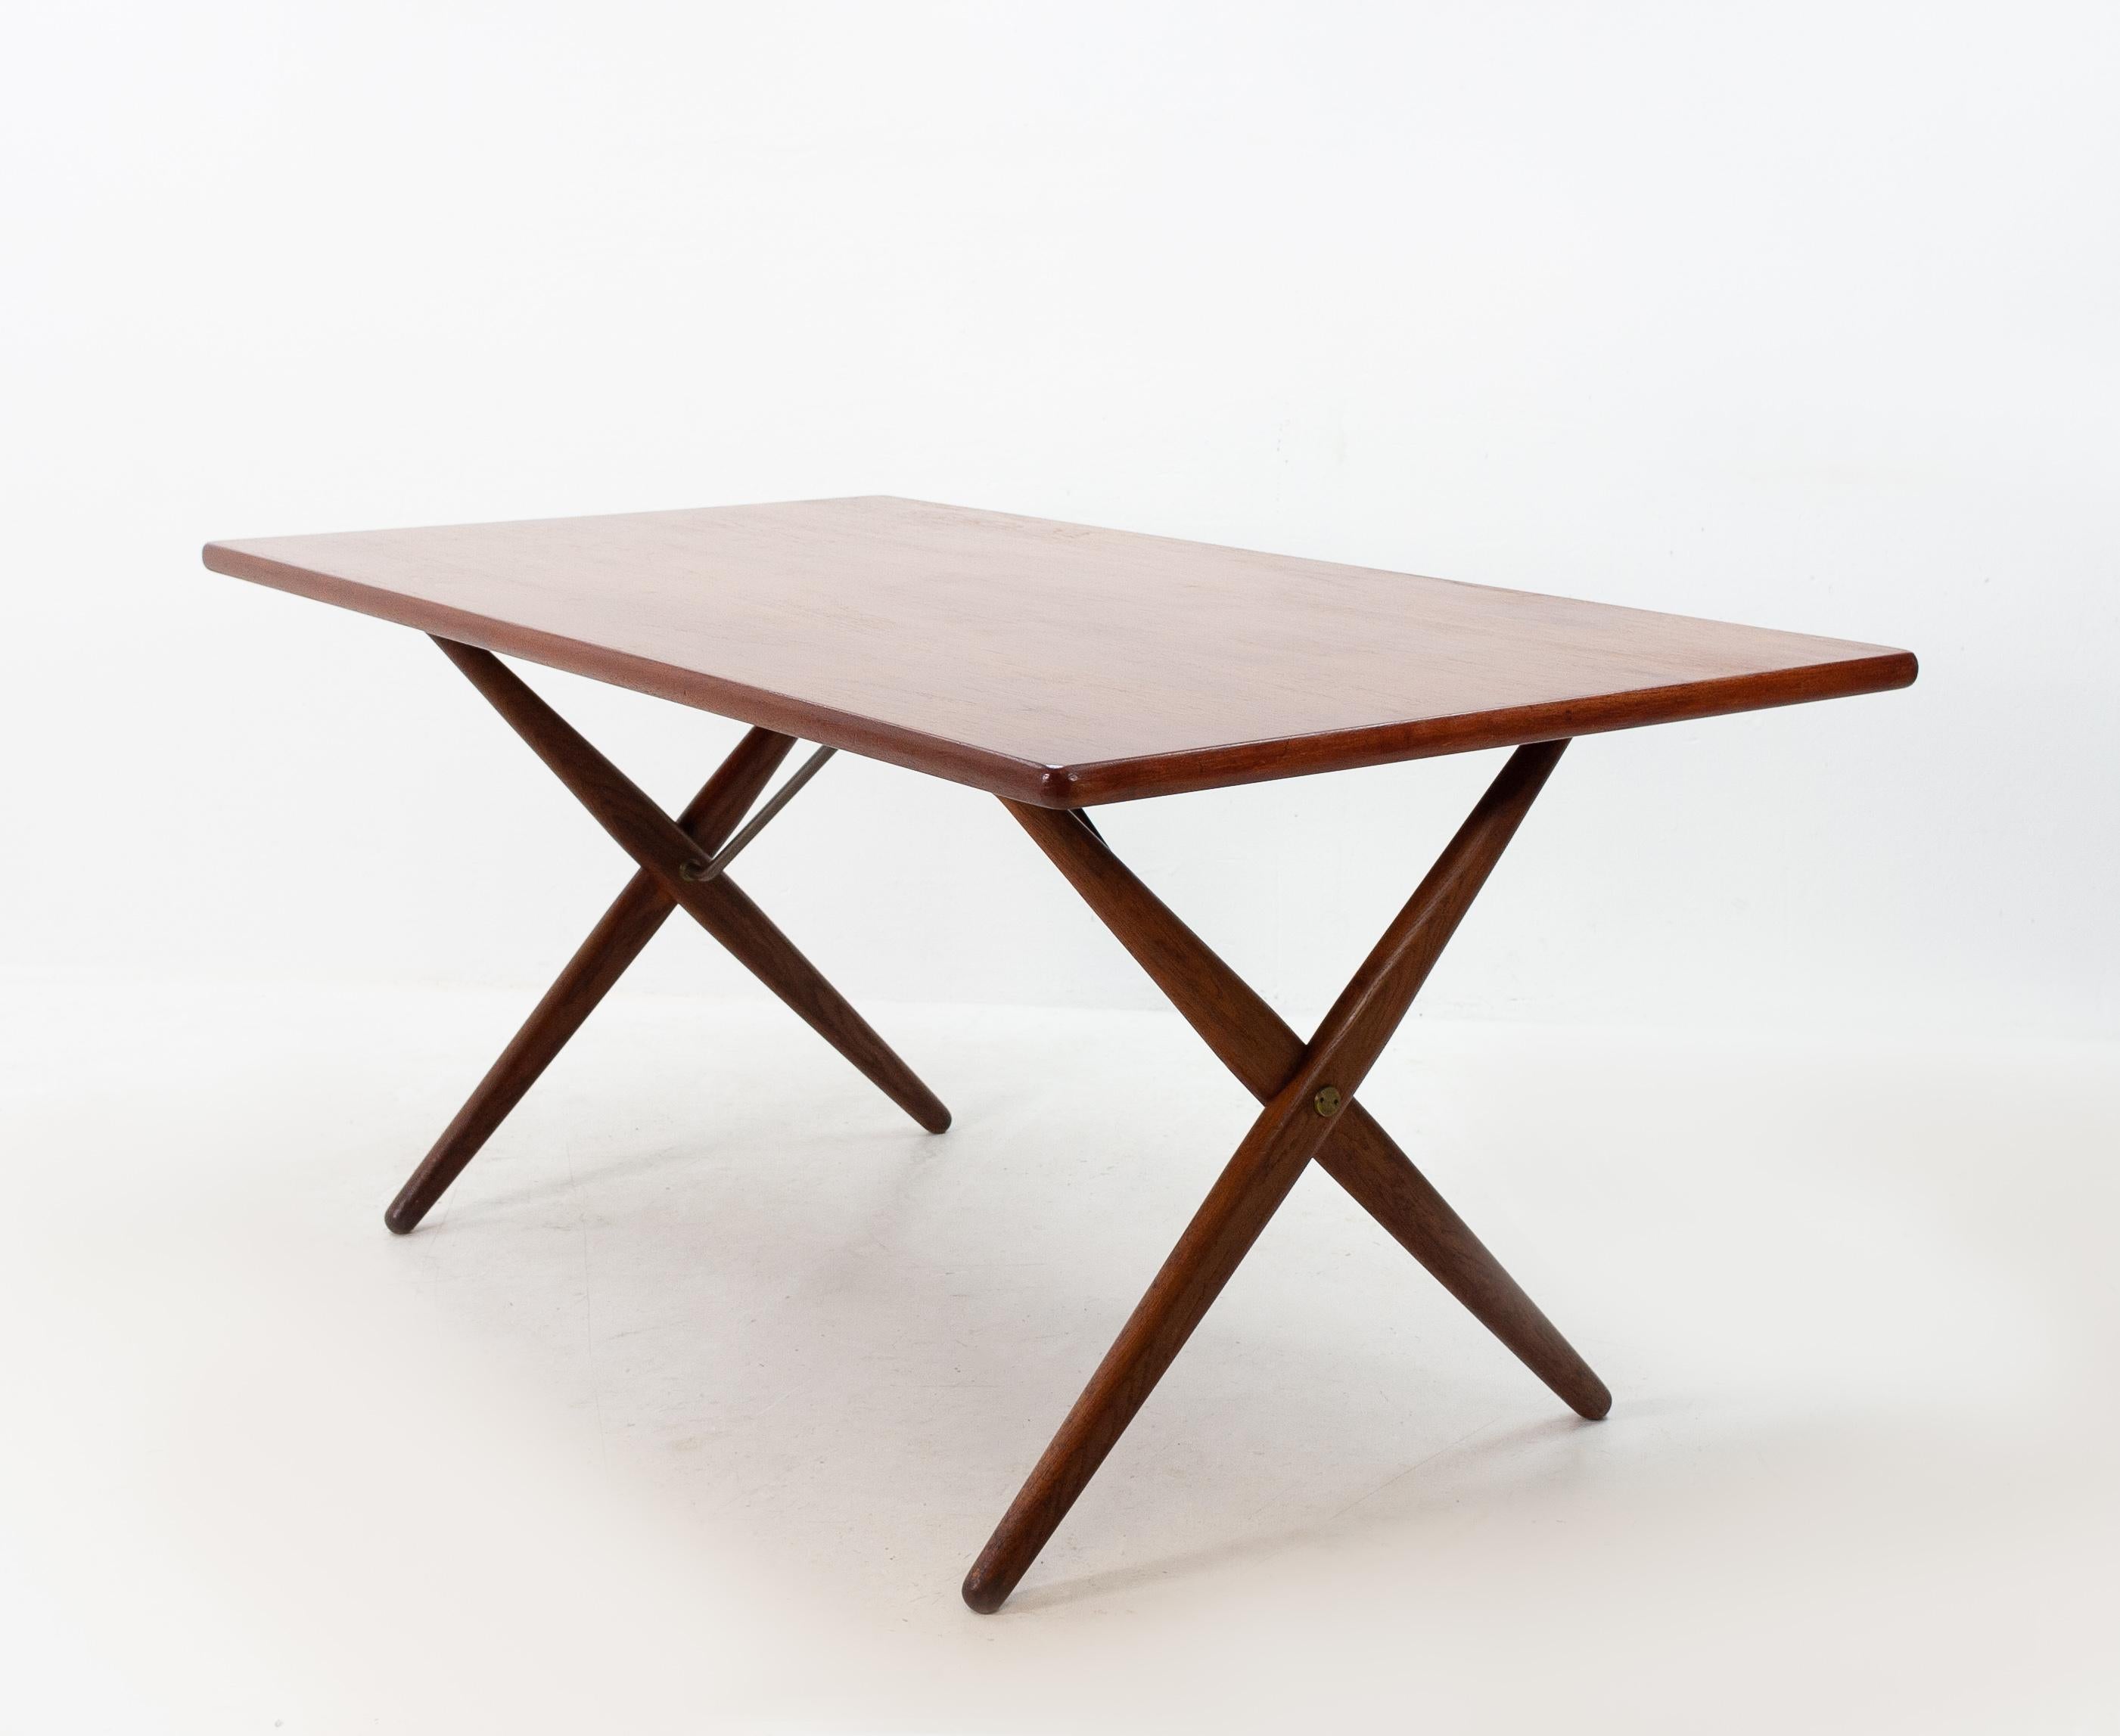 Iconic dining table model AT-303, in teak, oak and brass, by Hans J. Wegner for Andreas Tuck, Denmark, 1955. Dining table with X-shaped legs, by Danish Designer Hans Wegner. This table is considered as one of the best known designs from Wenger.